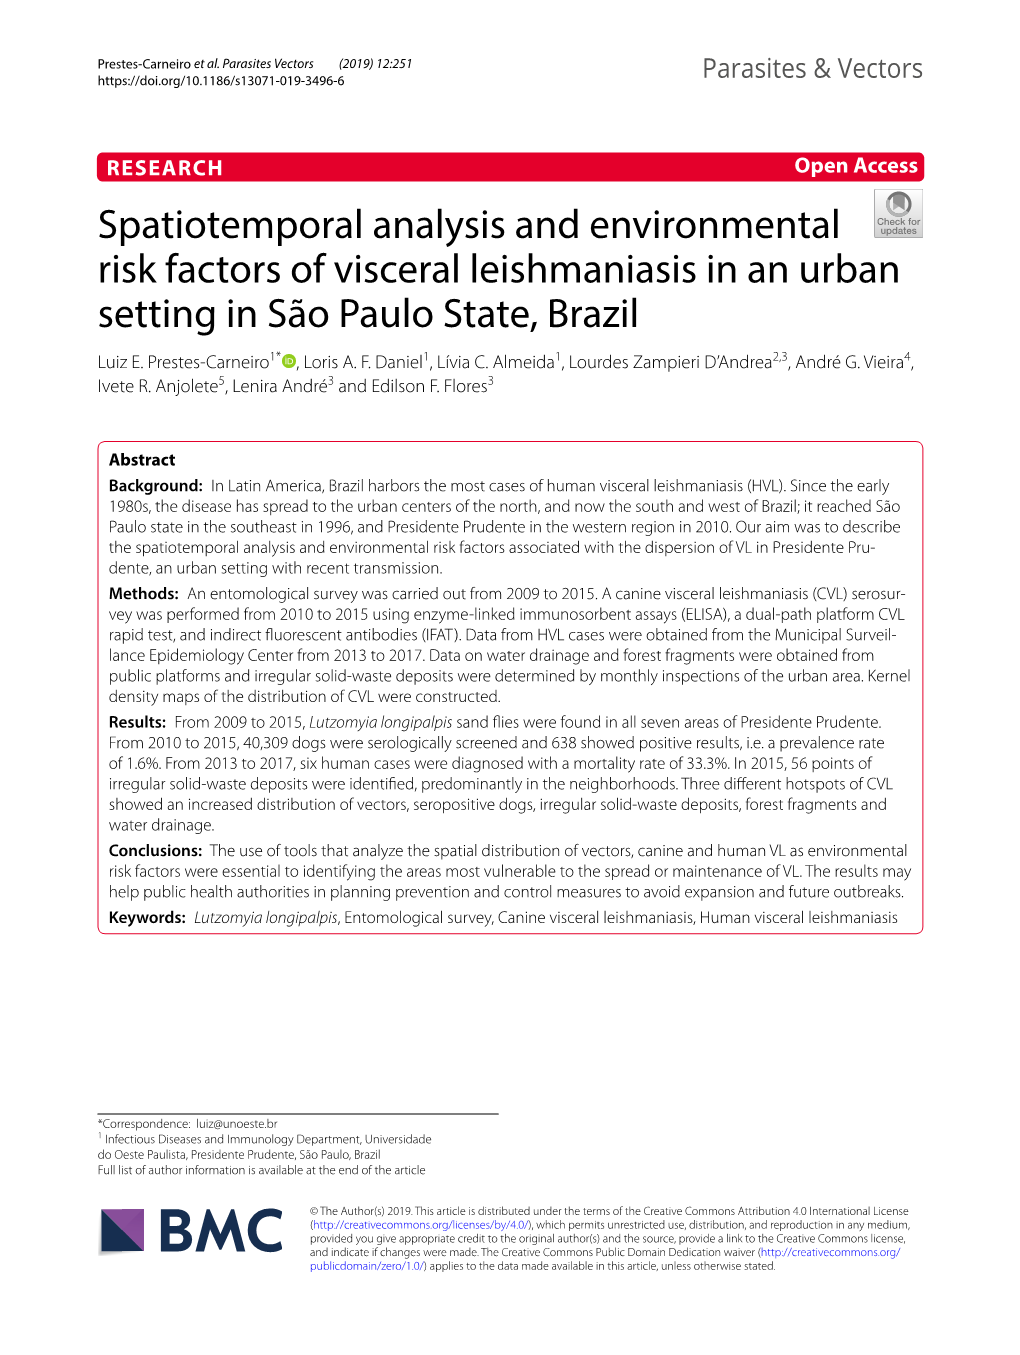 Spatiotemporal Analysis and Environmental Risk Factors of Visceral Leishmaniasis in an Urban Setting in São Paulo State, Brazil Luiz E